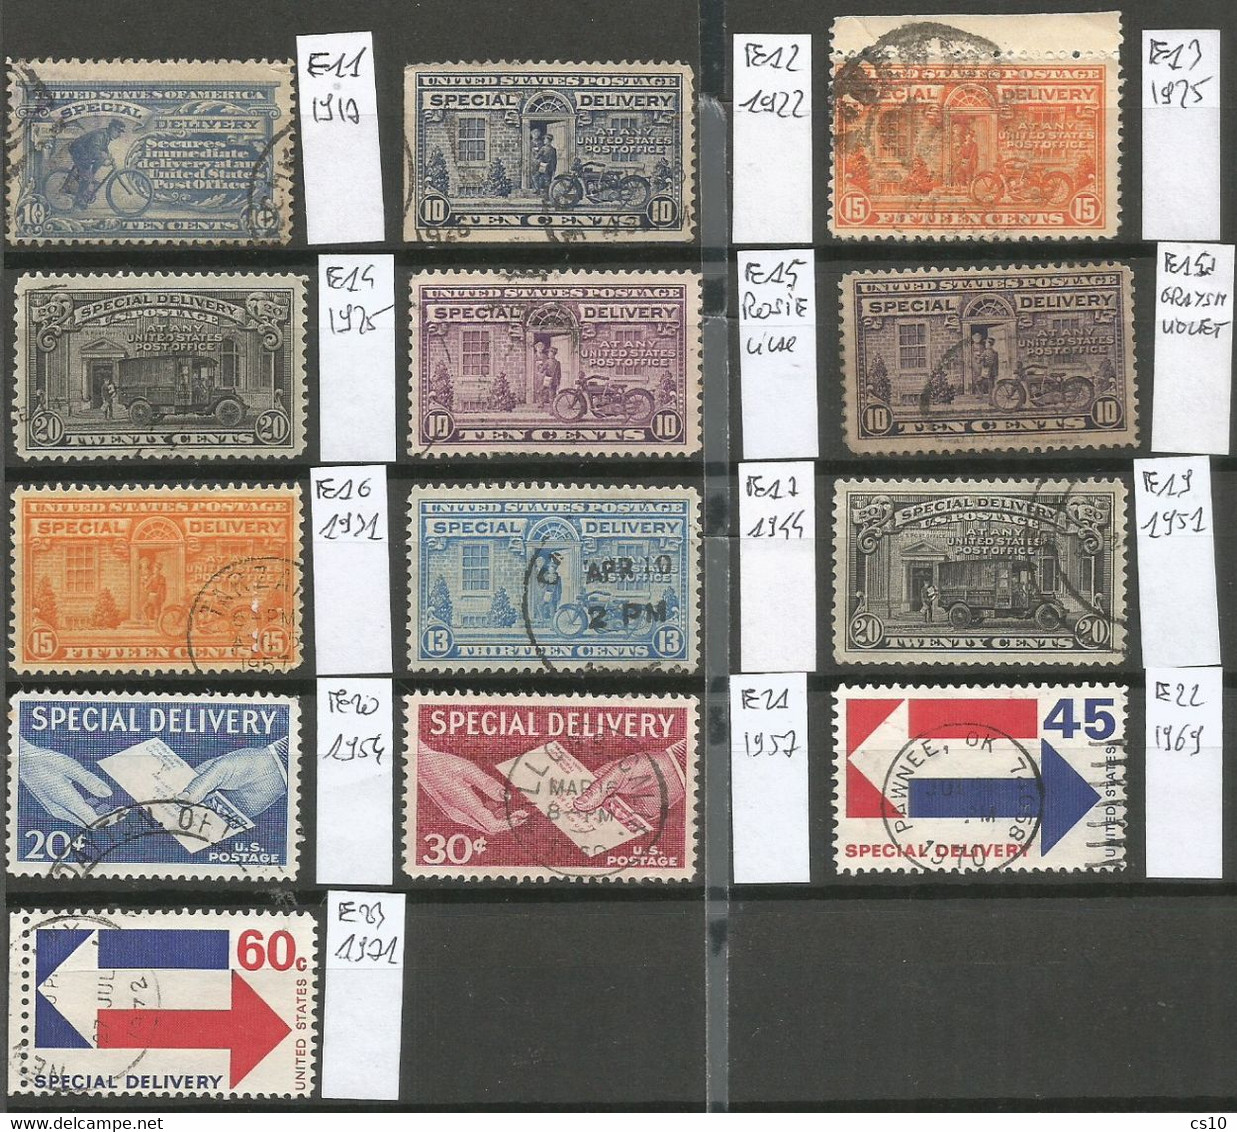 USA 1917 / 1971 Selection Speedy Express Special Delivery SC# E11/17 + E19/23 - VFU - Special Delivery, Registration & Certified